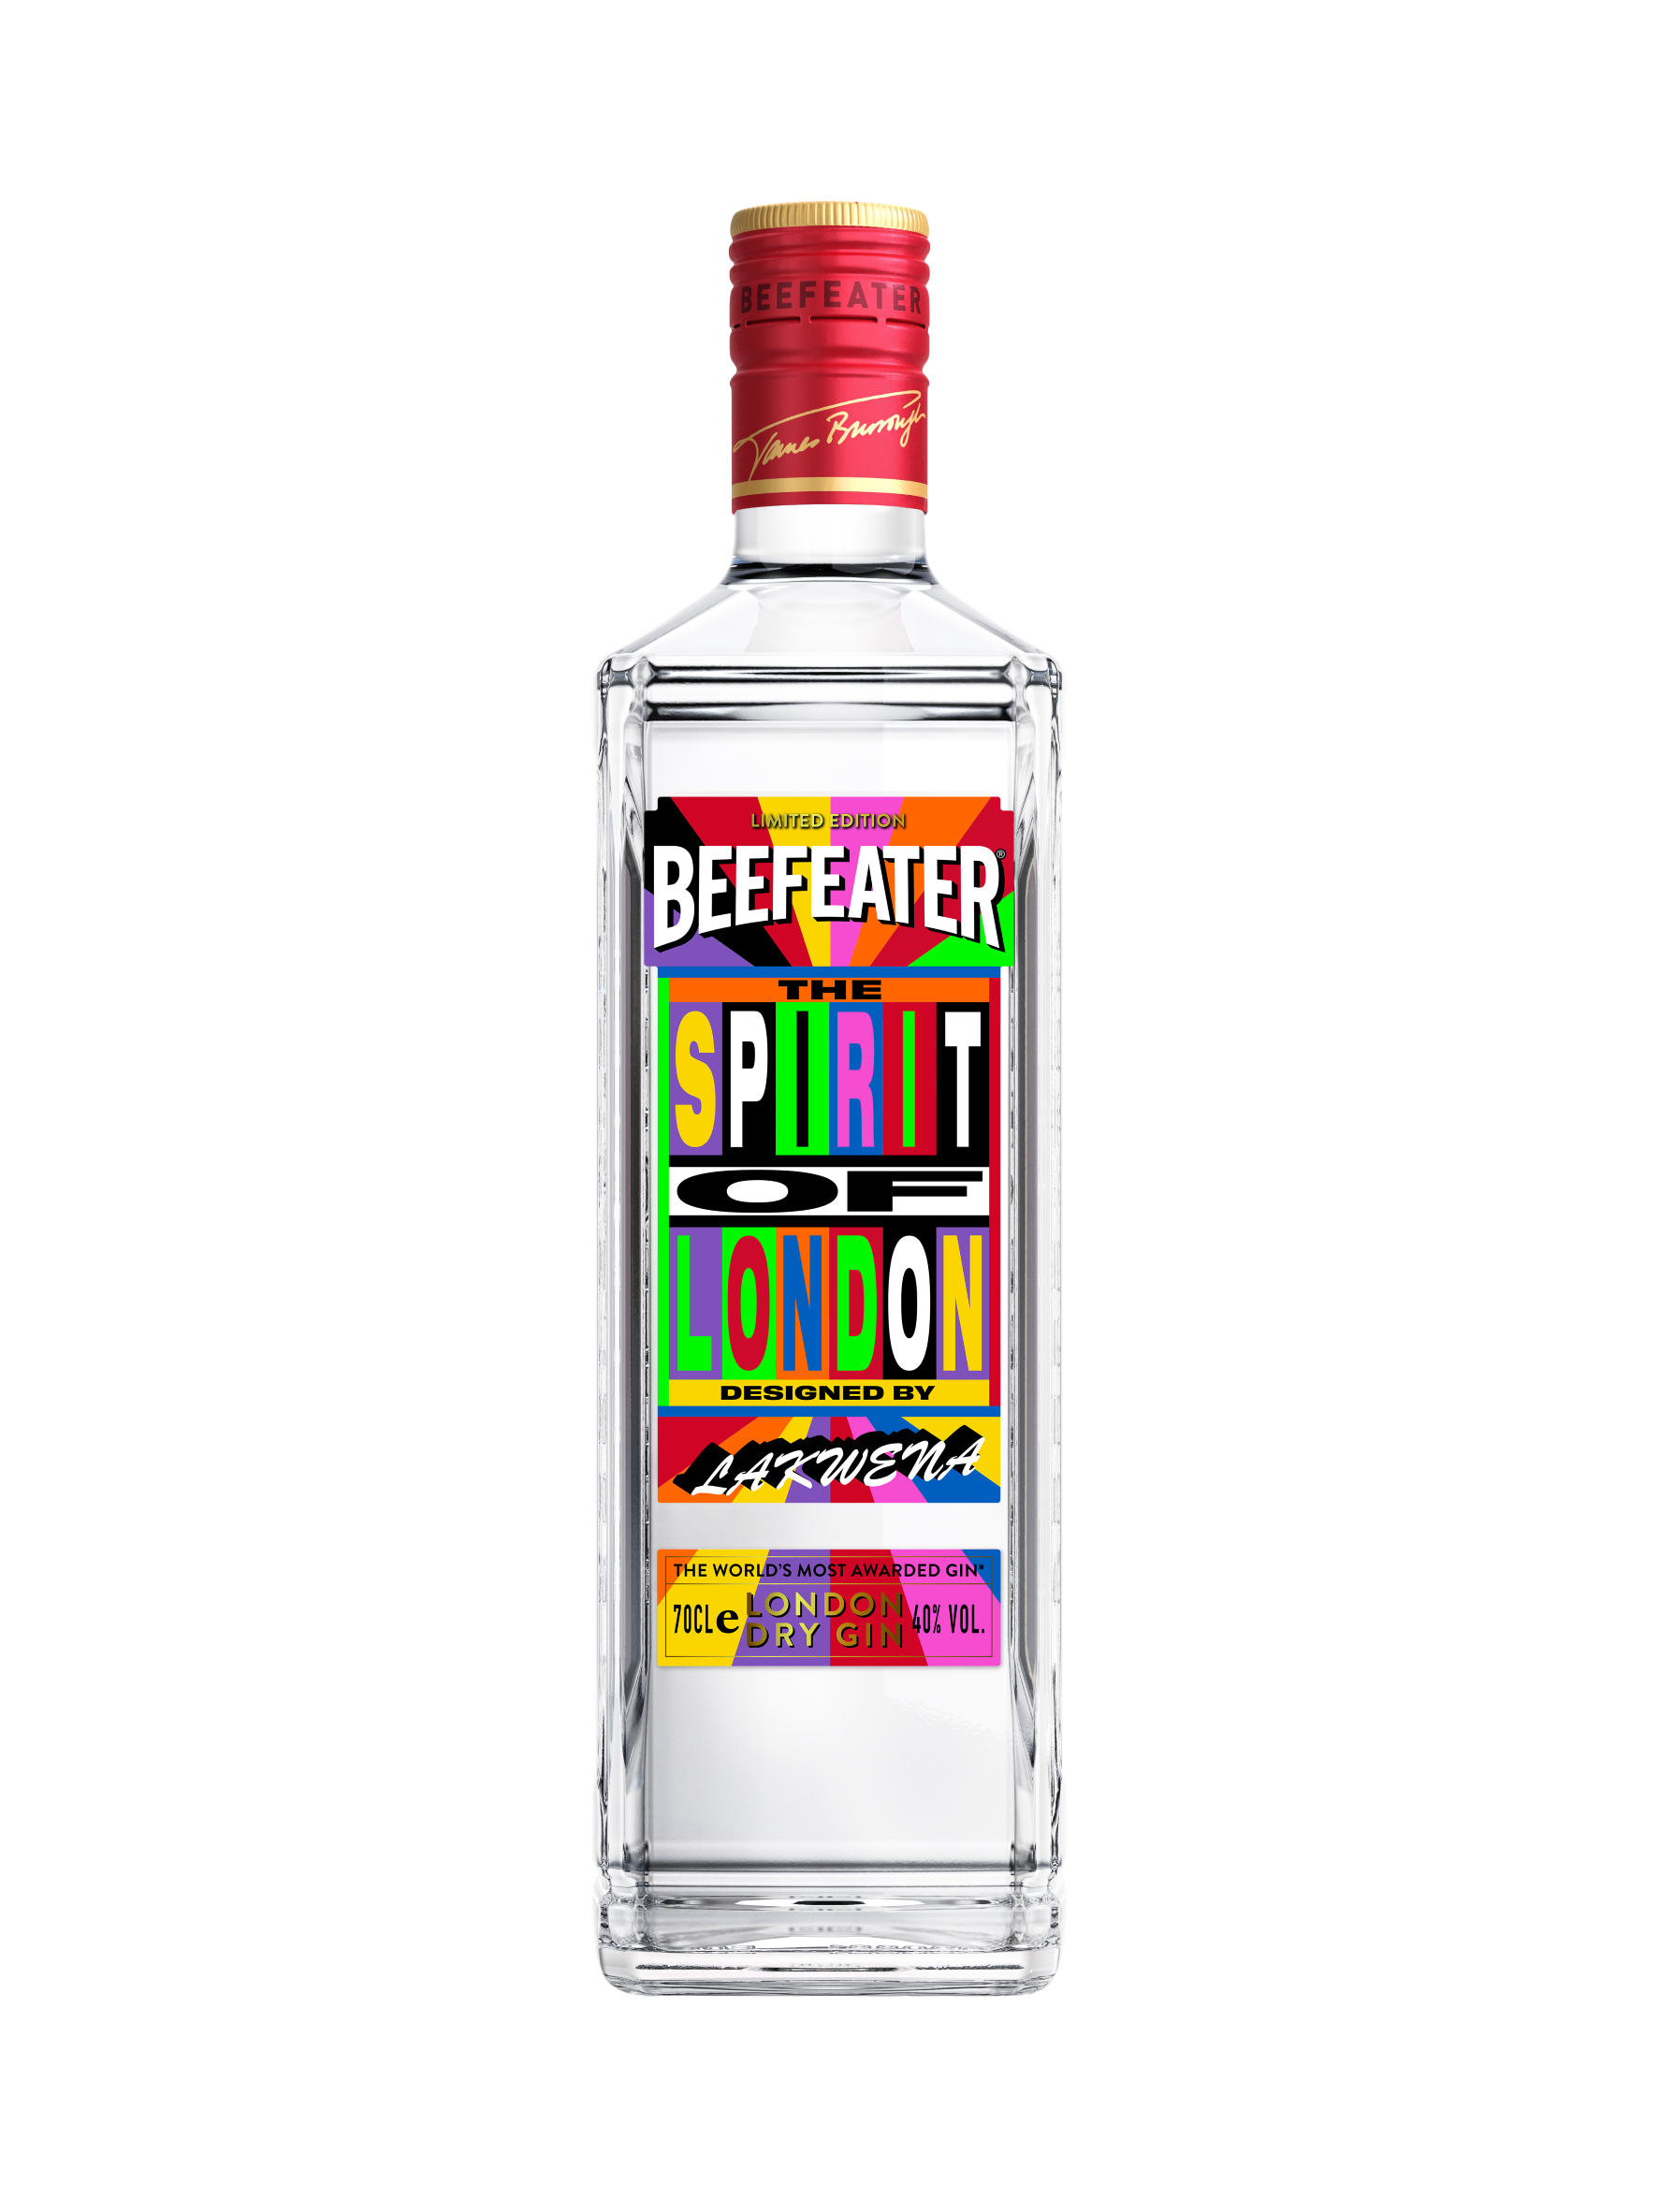 Beefeater Gin collaborates with London-based artist Lakwena